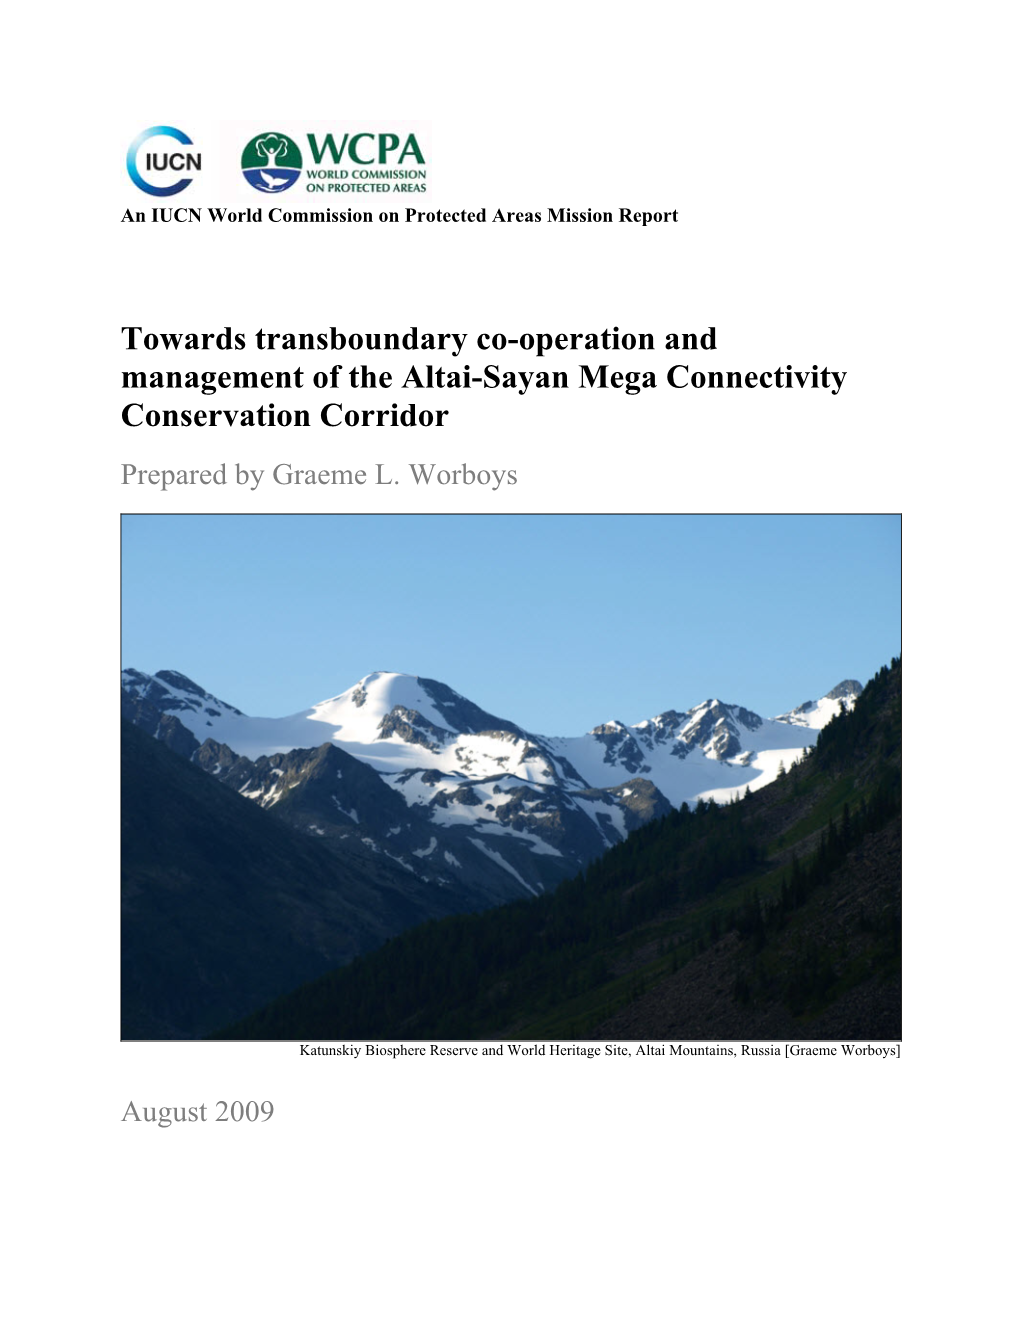 Towards Transboundary Co-Operation and Management of the Altai-Sayan Mega Connectivity Conservation Corridor